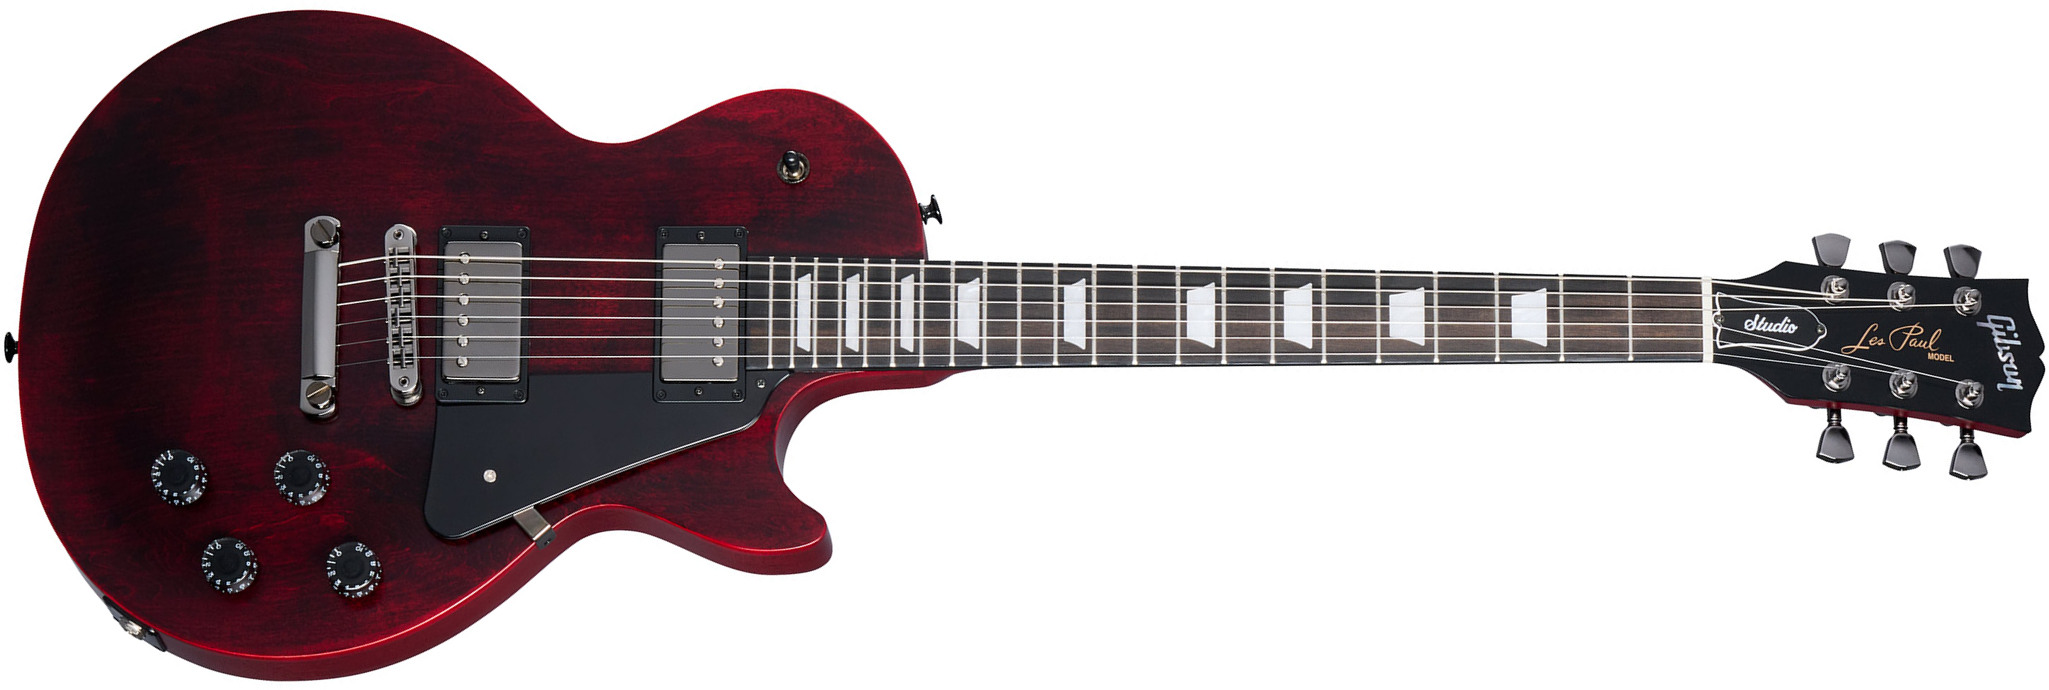 Gibson Les Paul Modern Studio Usa 2h Ht Eb - Wine Red Satin - Single cut electric guitar - Main picture